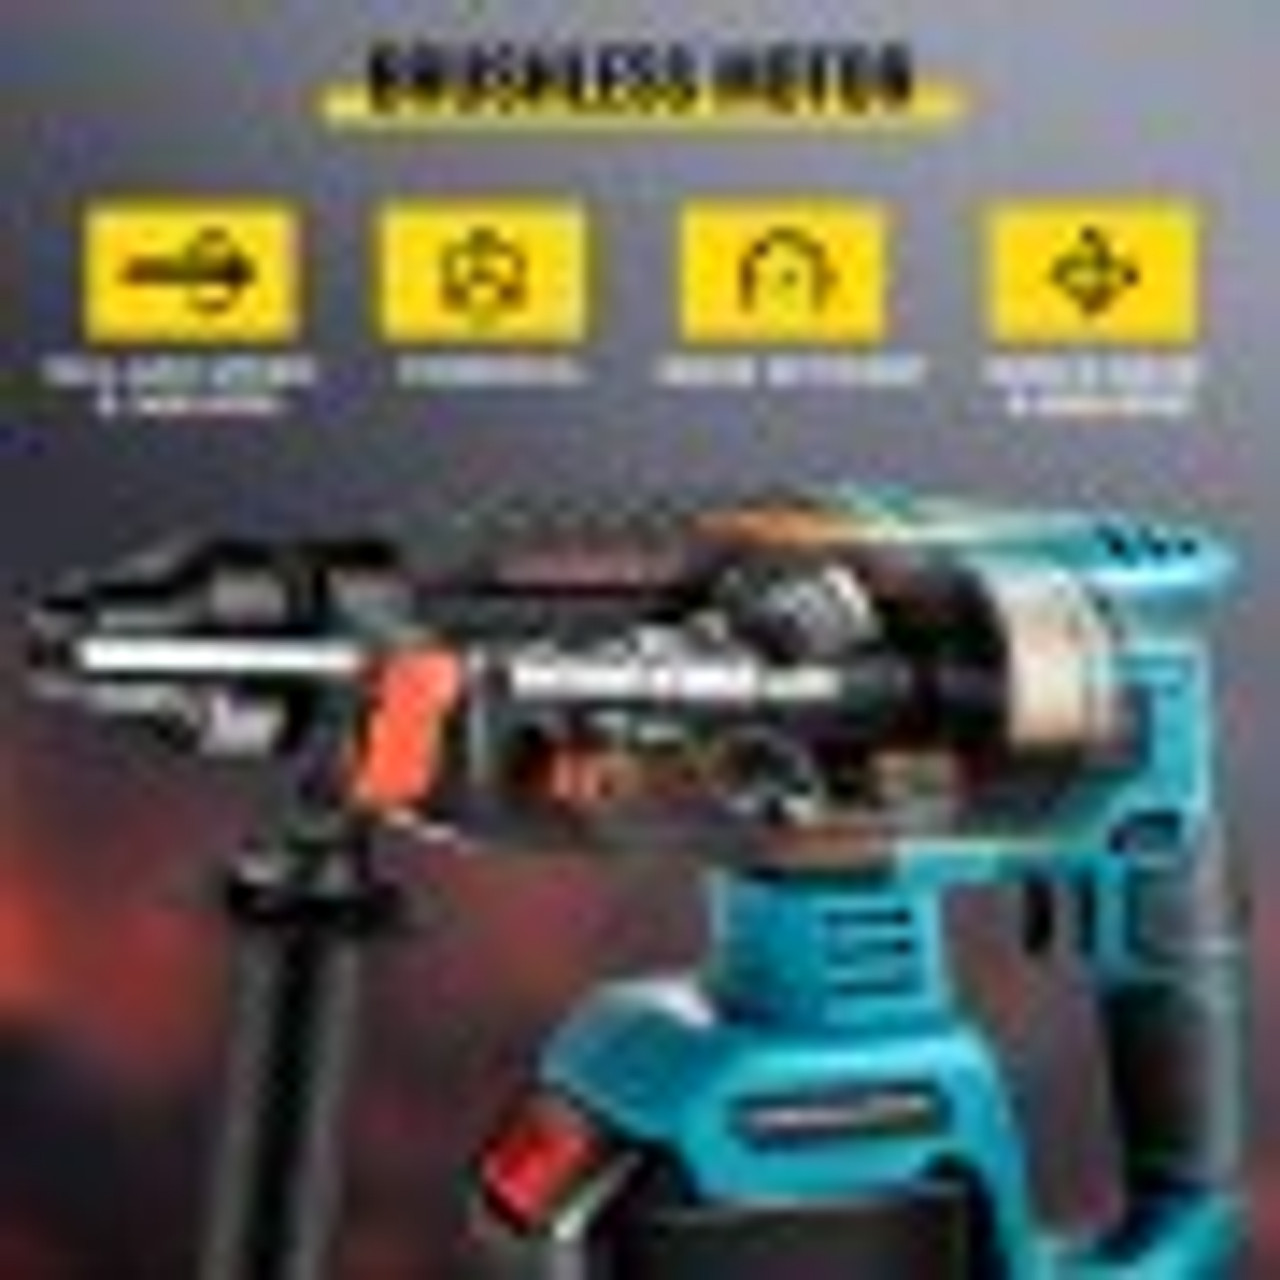 SDS-Plus Rotary Hammer Drill, 1400 rpm & 450 bpm Variable Speed Electric Hammer, 4 IN 1 Cordless Drill, Measurable Hammer Ideal with 1 for Concrete, Steel, and Wood